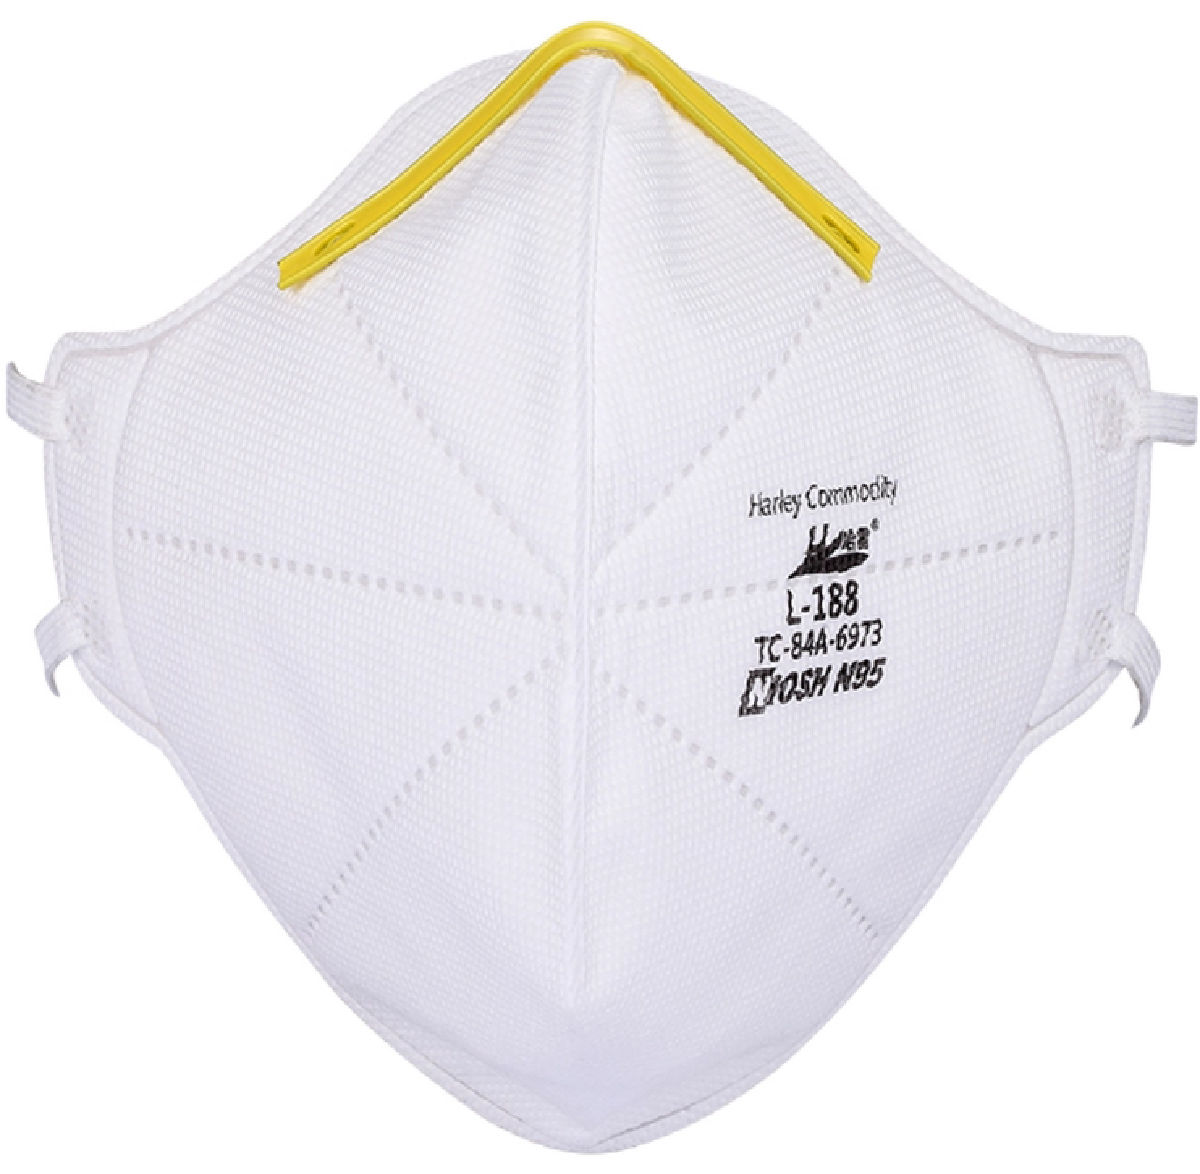 Harley Commodity L-188 NIOSH Approved N95 Respirator Face Masks